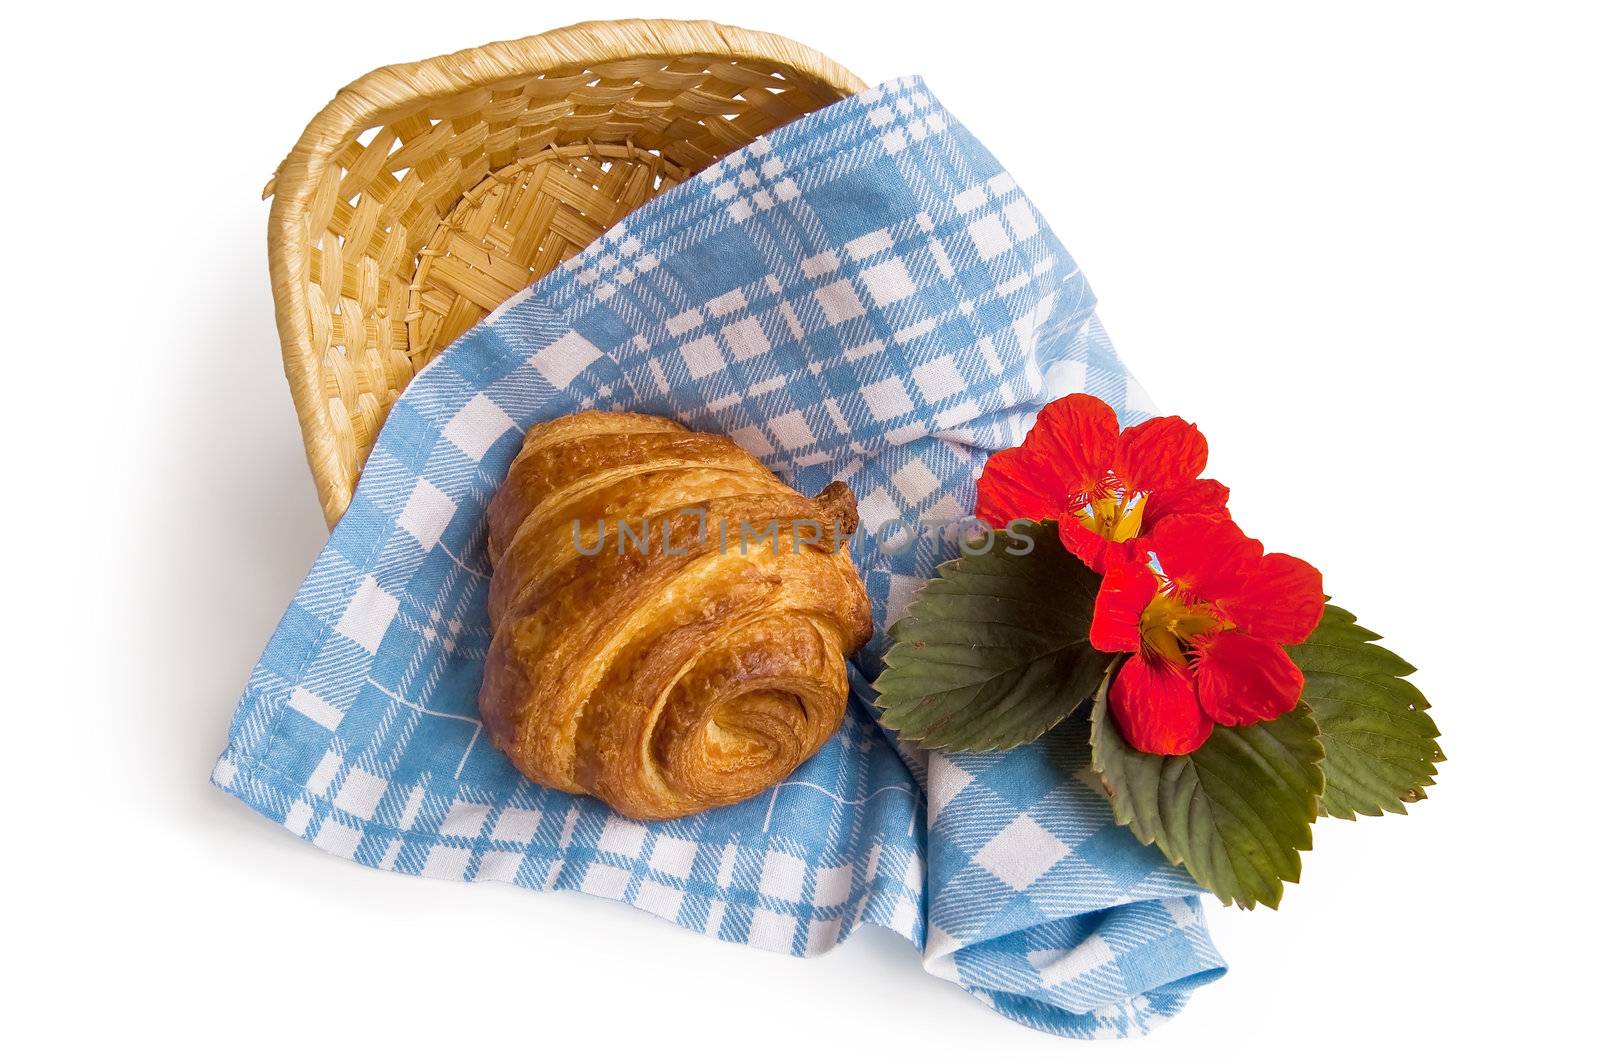 Golden croissant on a checkered blue cloth, in a wicker basket with red flowers isolated on white background